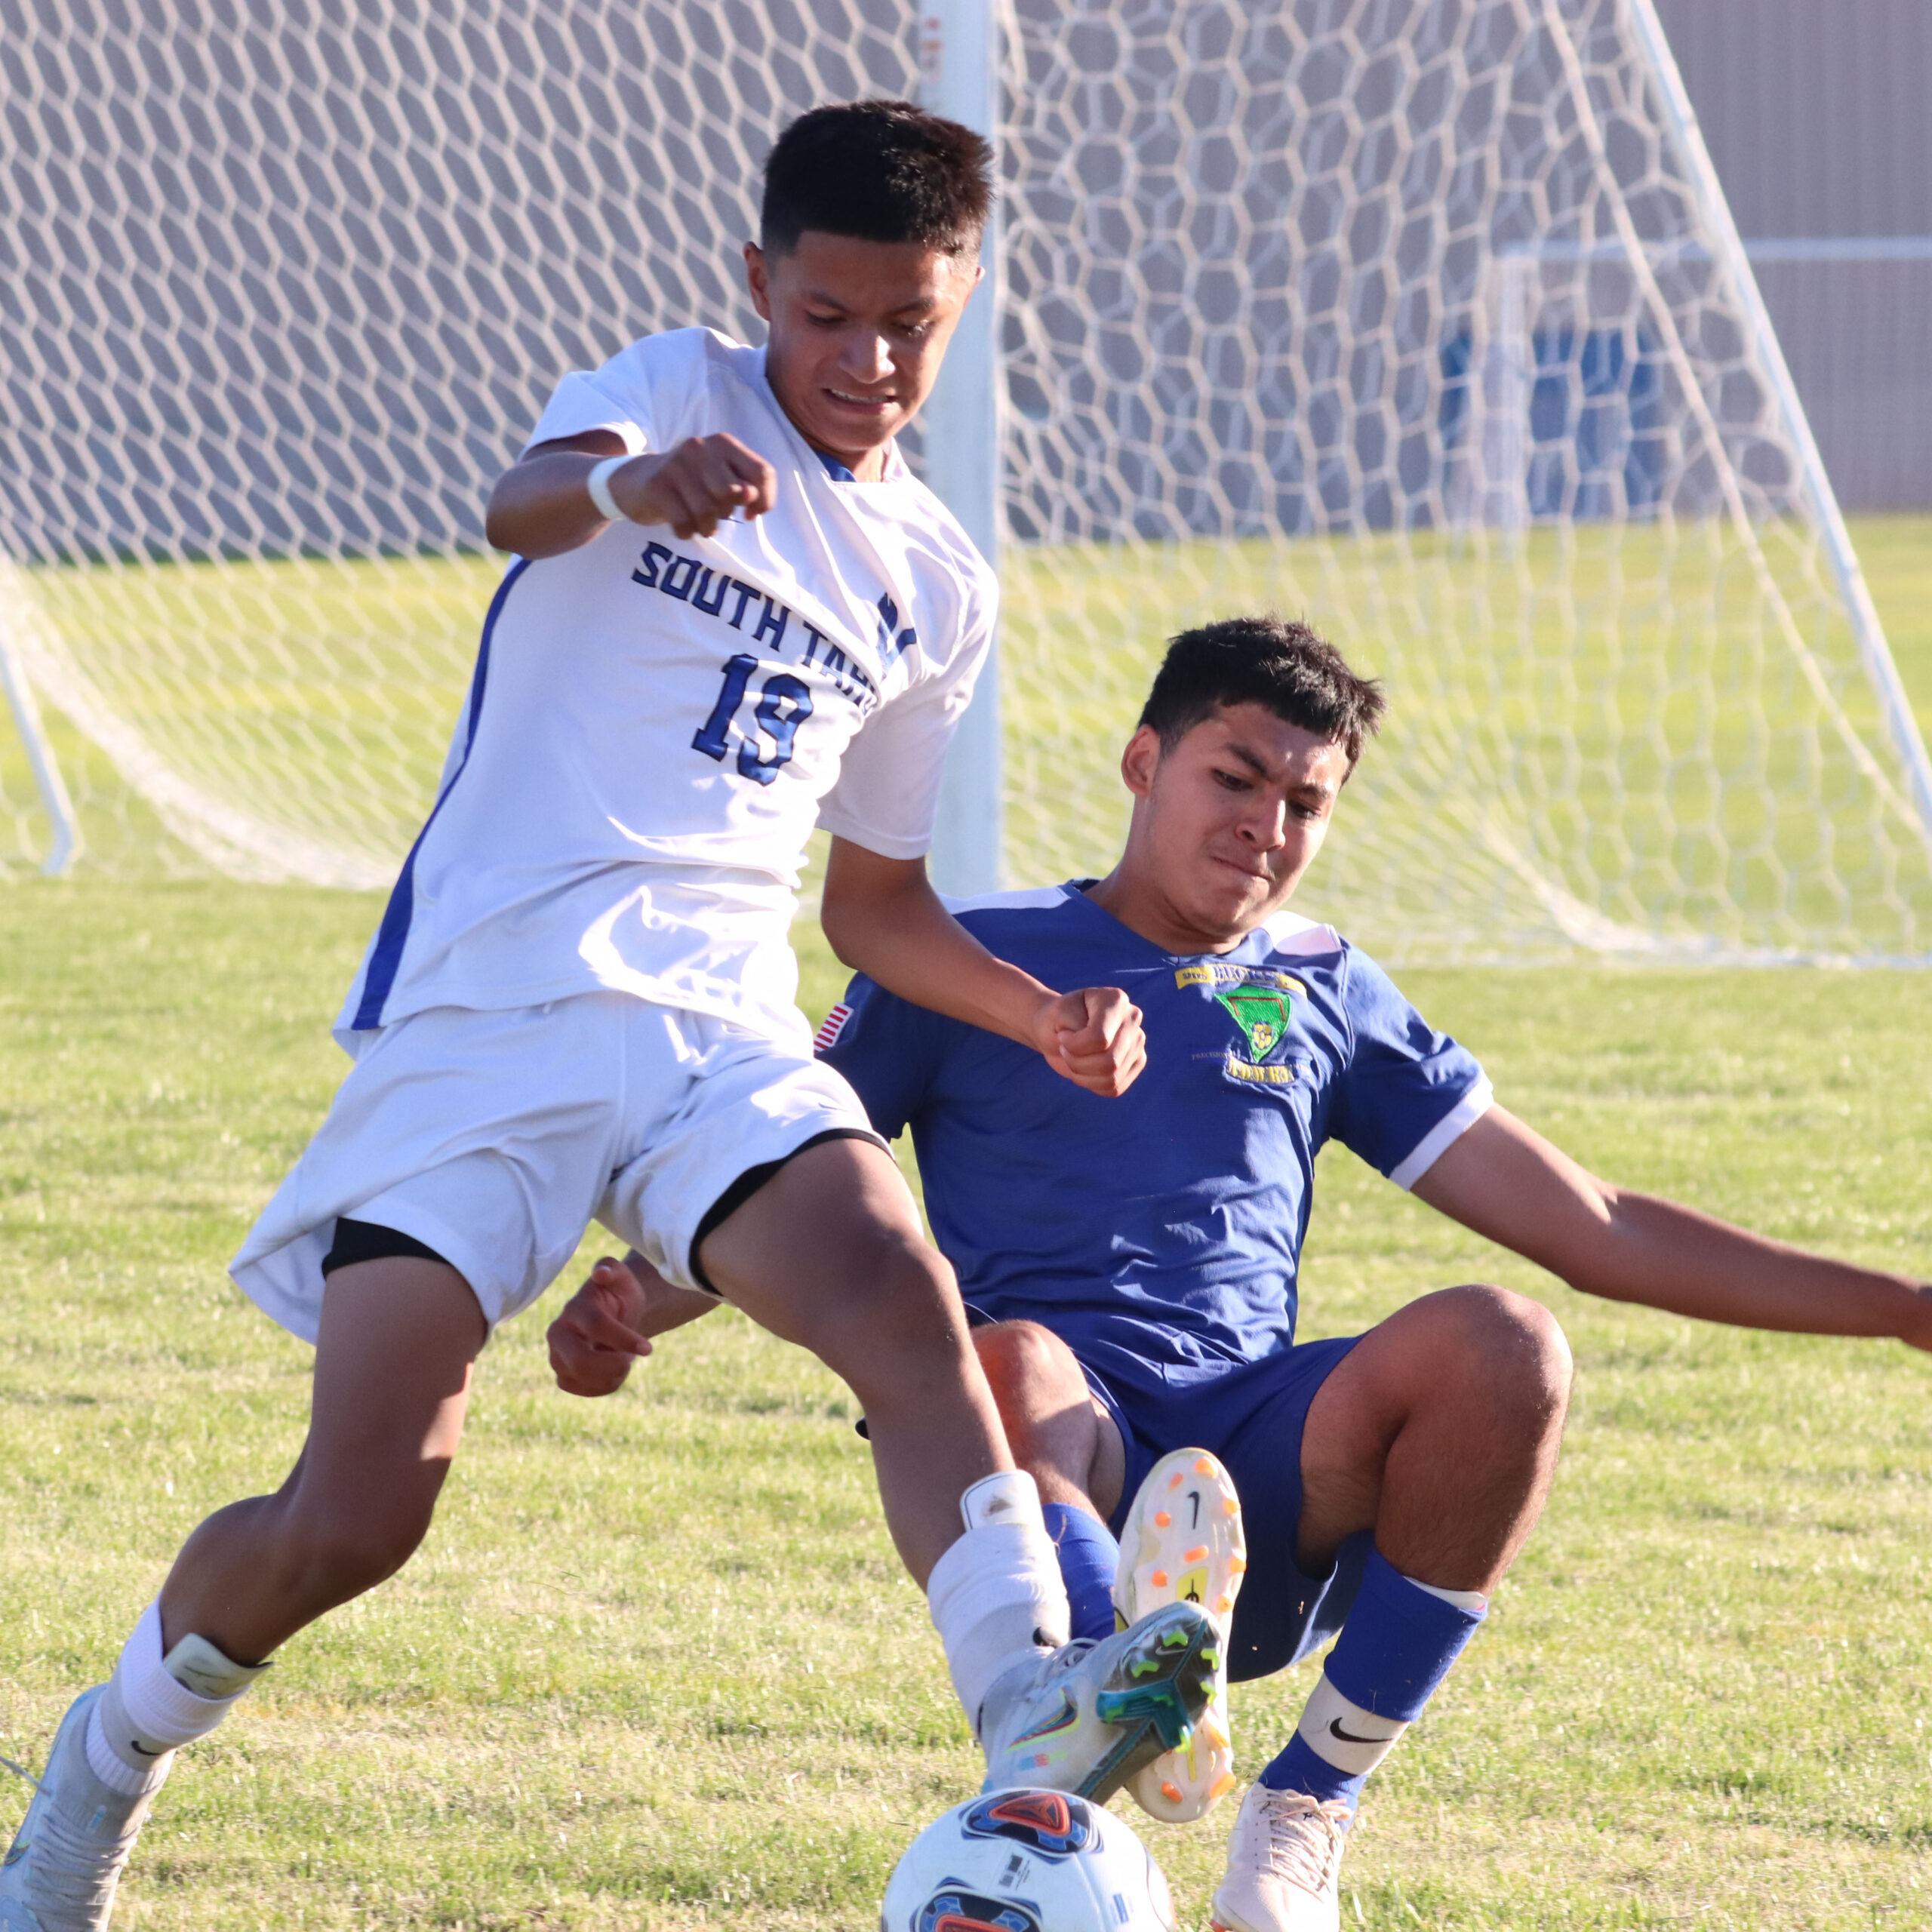 The varsity boy’s soccer finishes strong 